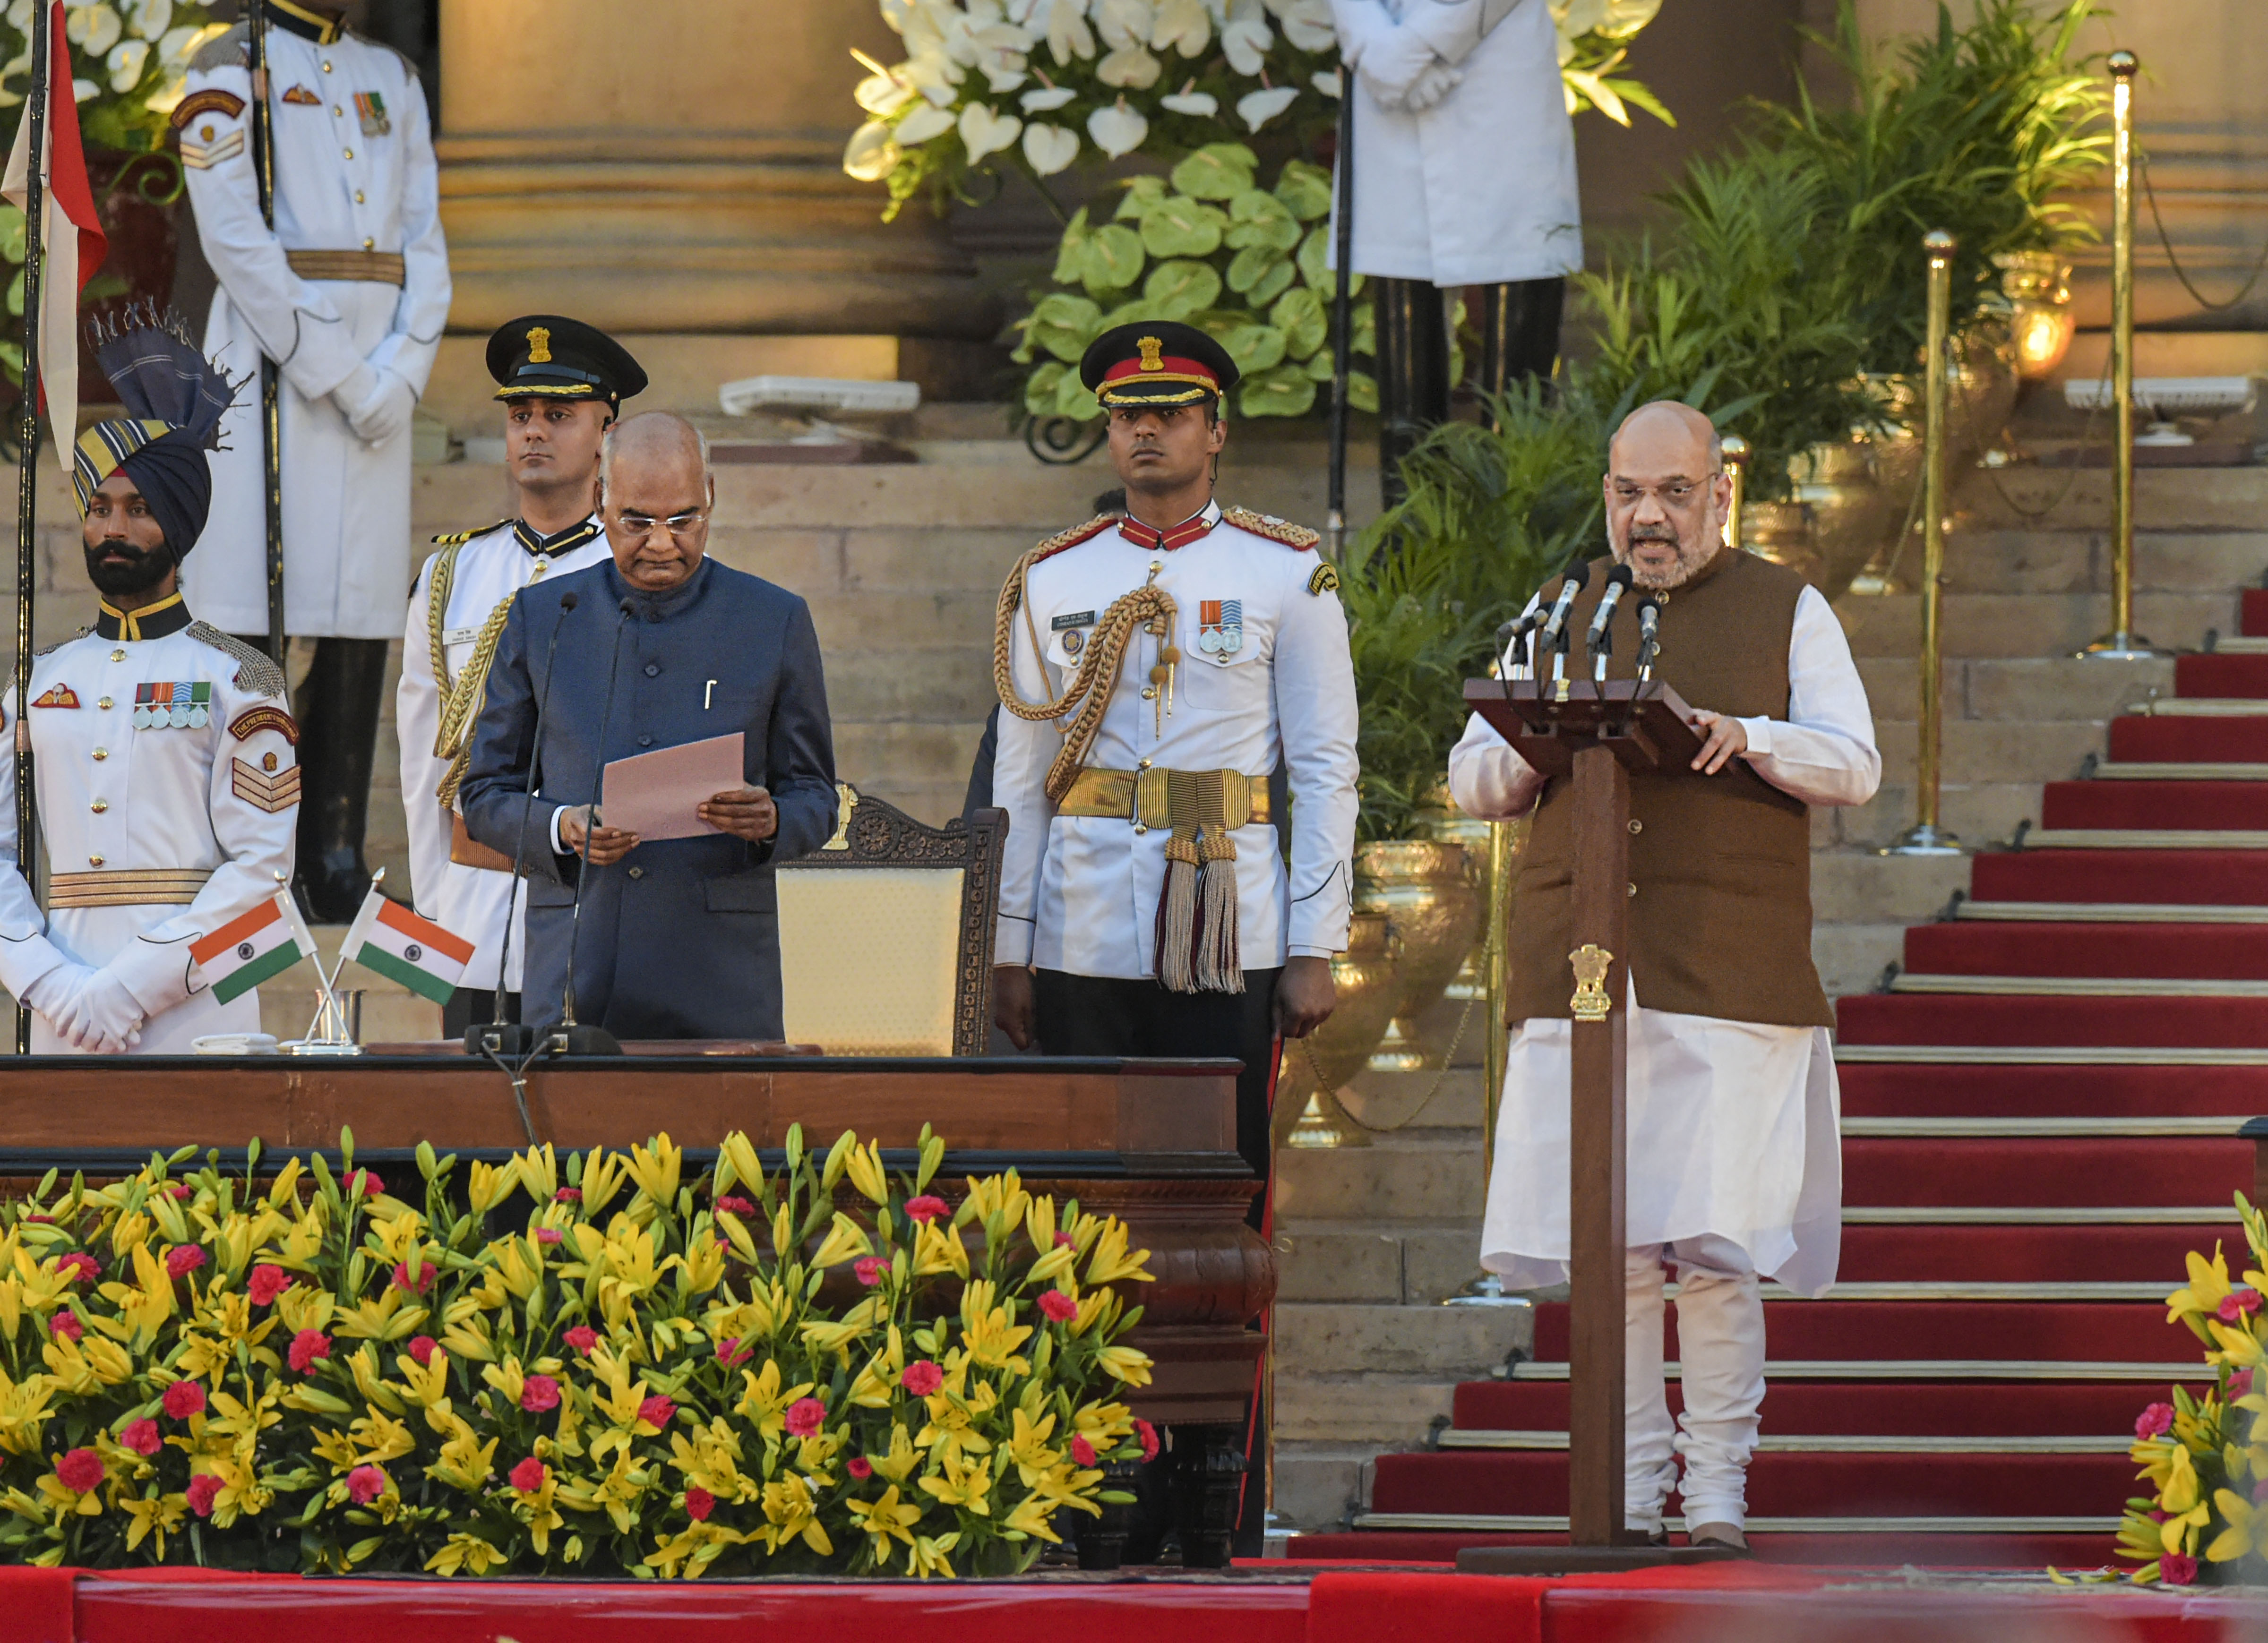 Amit Shah being sworn-in as a Cabinet minister by President Ram Nath Kovind during a ceremony at the forecourt of Rashtrapati Bhawan in New Delhi - PTI